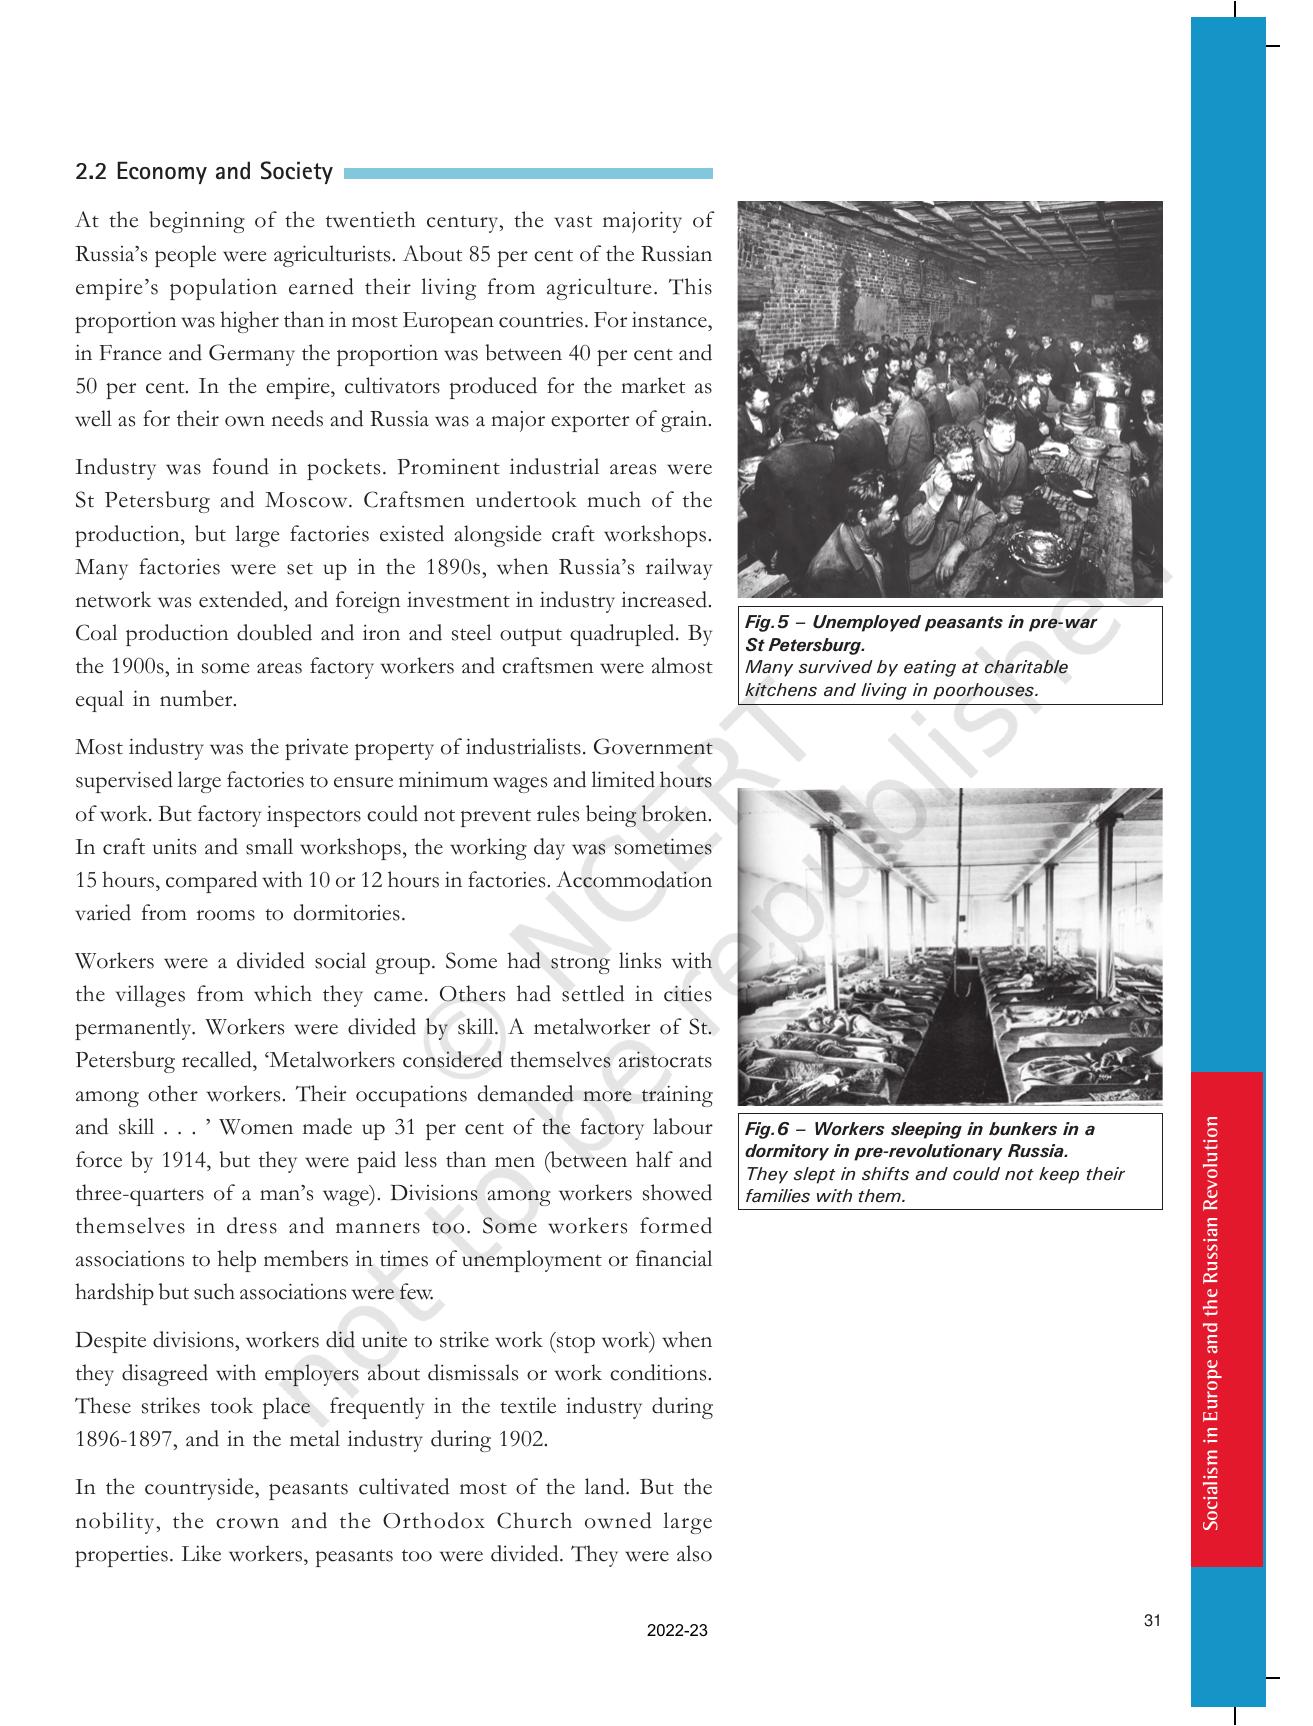 NCERT Book for Class 9 History Chapter 2 Socialism in Europe and the Russian Revolution - Page 7